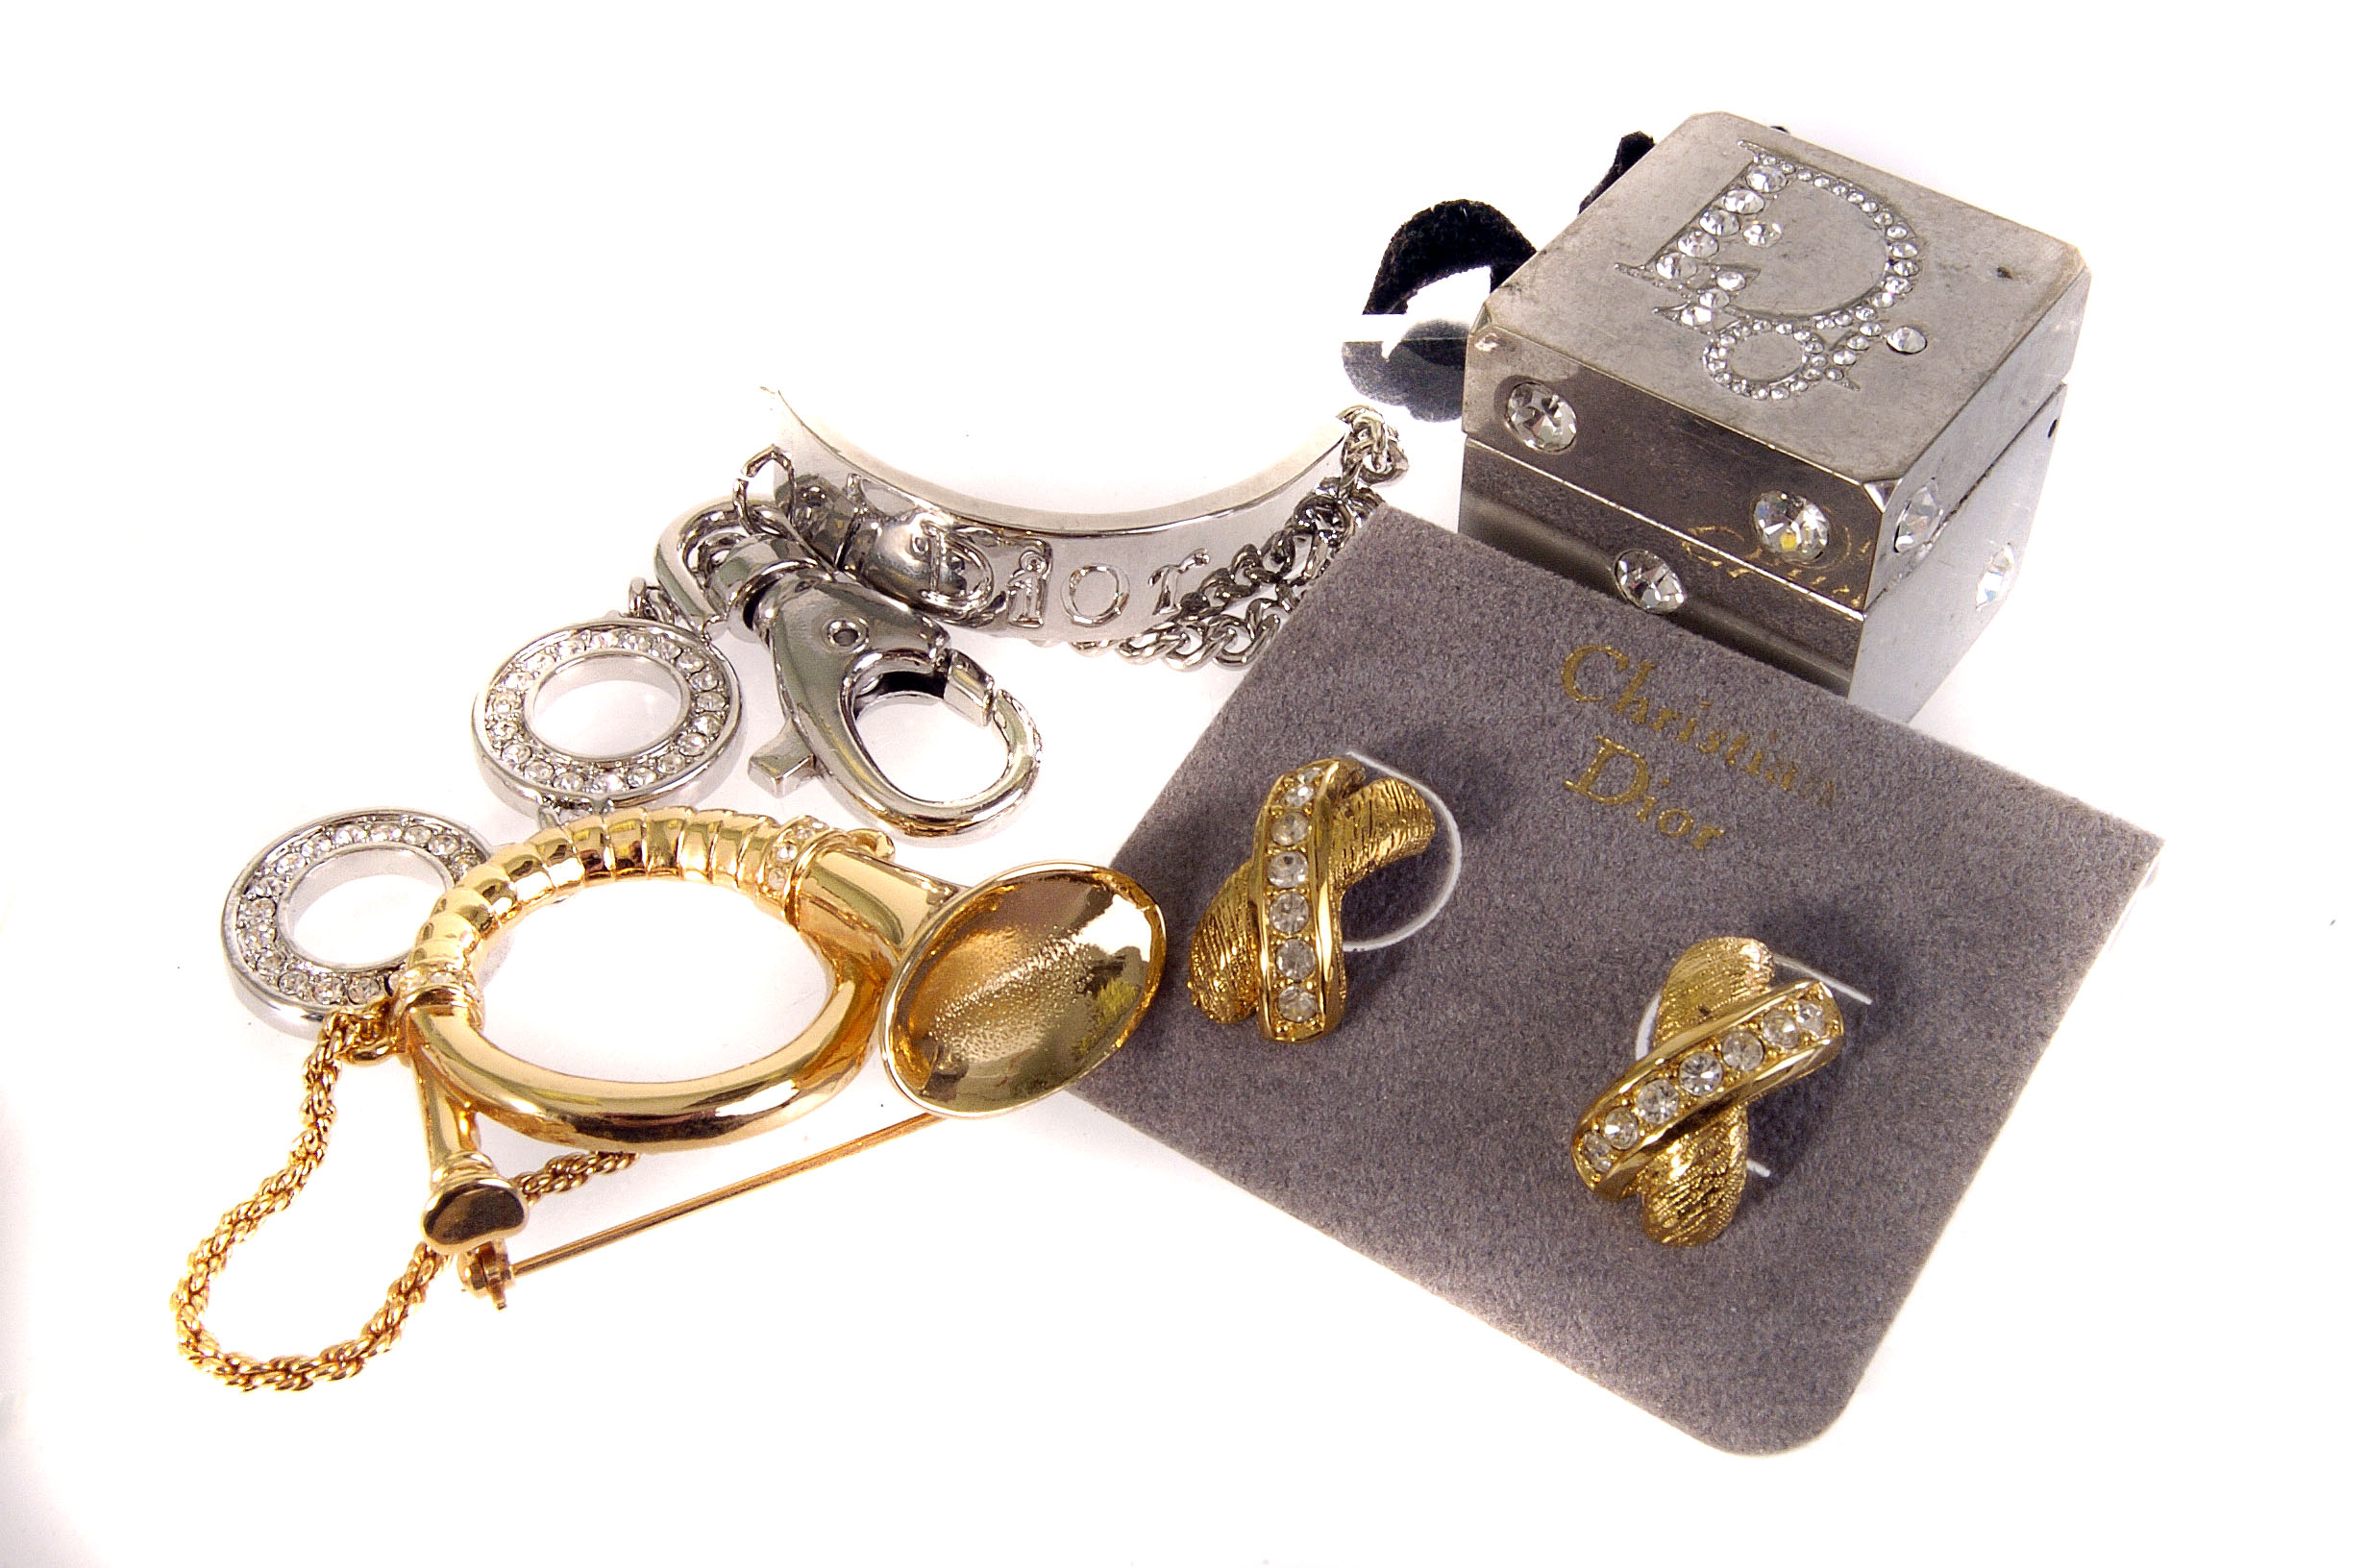 A collection of Christian Dior jewellery, including earrings, pendant on chain, a musical instrument